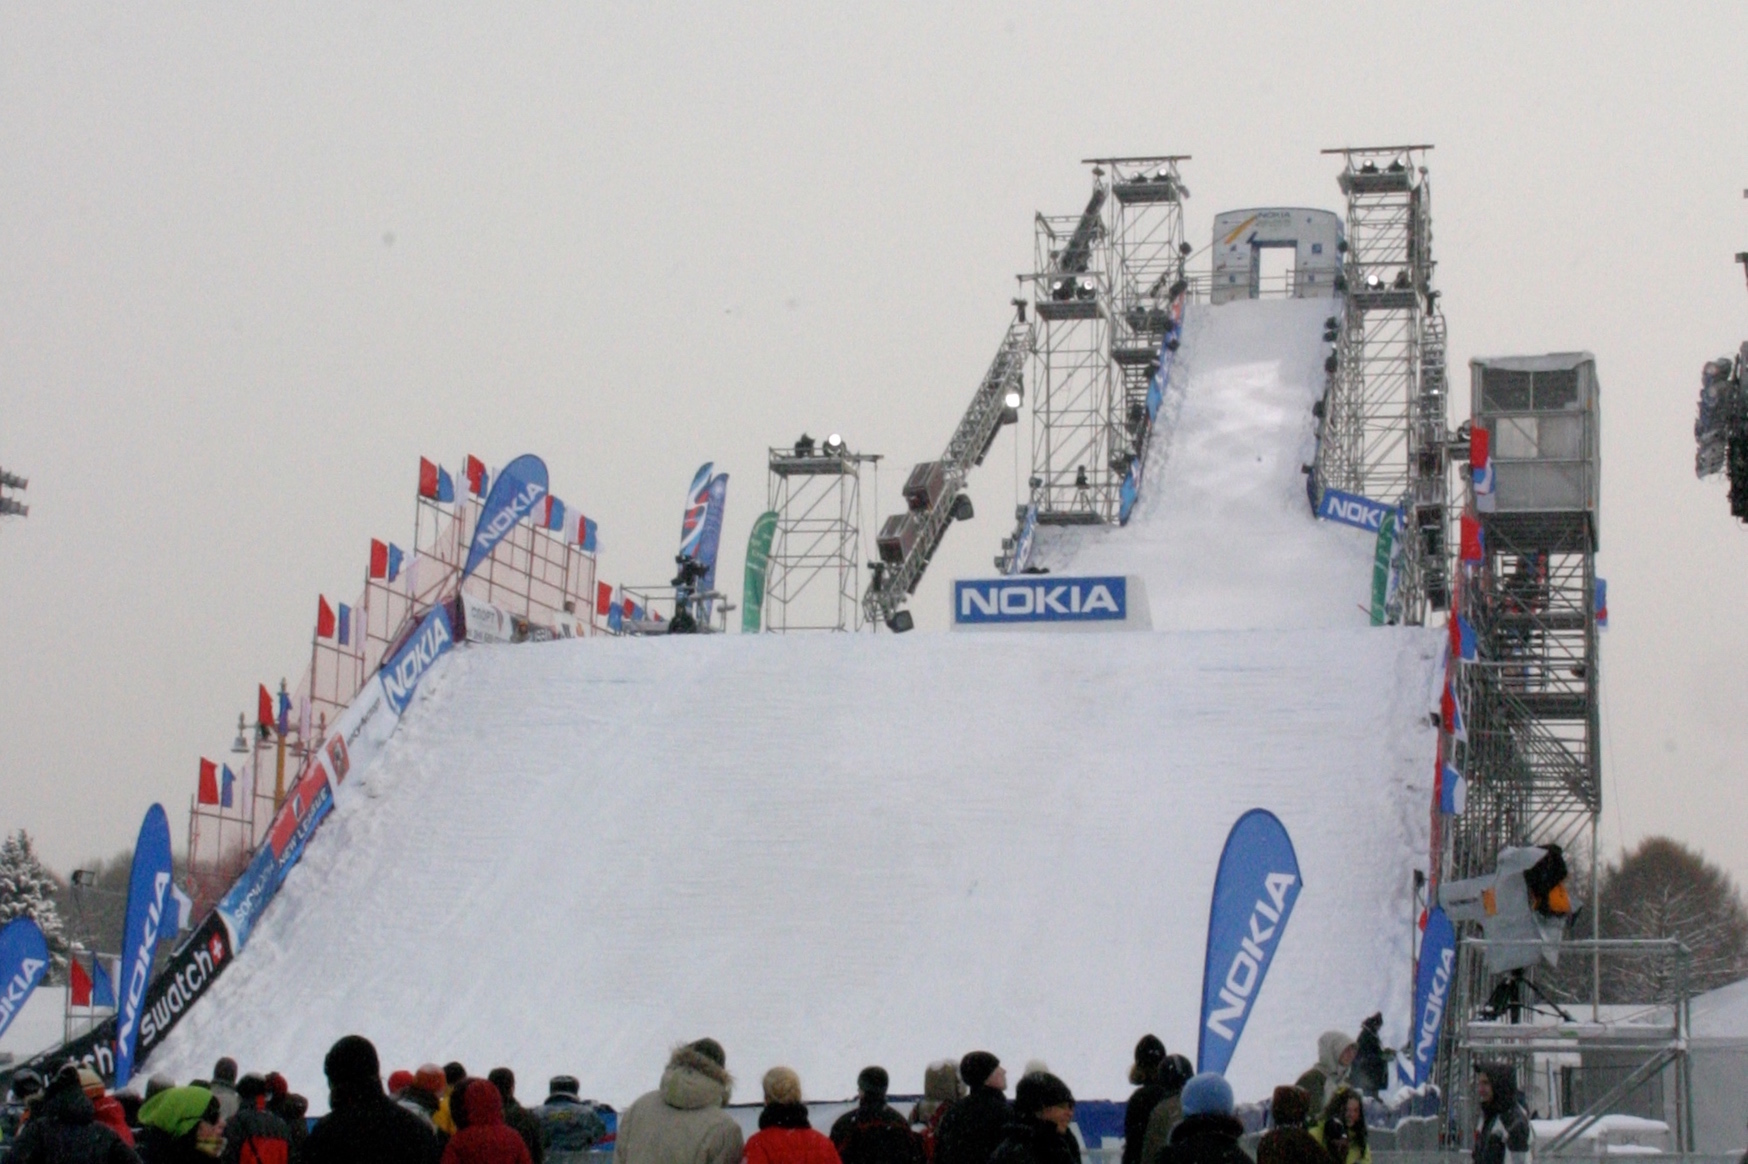 NOKIA SNOWBOARD WORLD CUP 2007. STAGE OF BIG AIR COMPETITION IN MOSCOW – JSA STAGE COMPANY